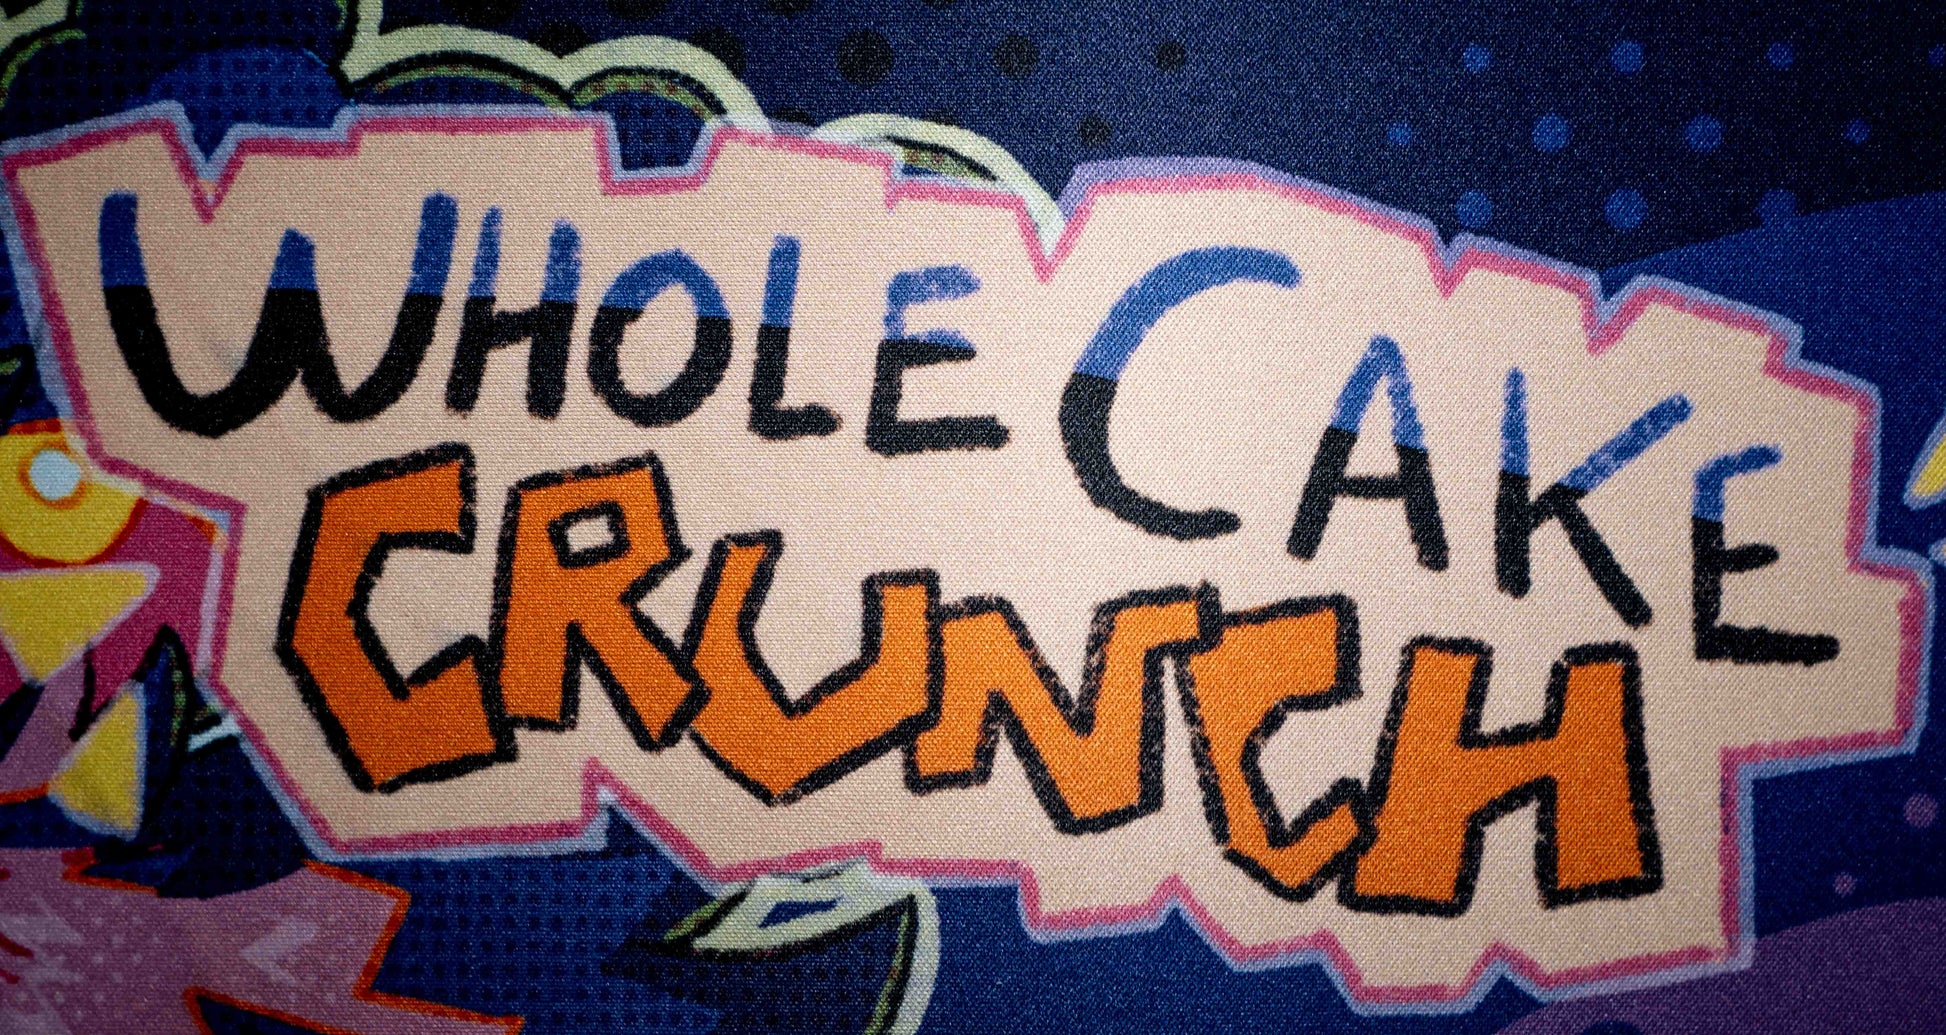 cartoonish text that reads 'Whole Cake Crunch'